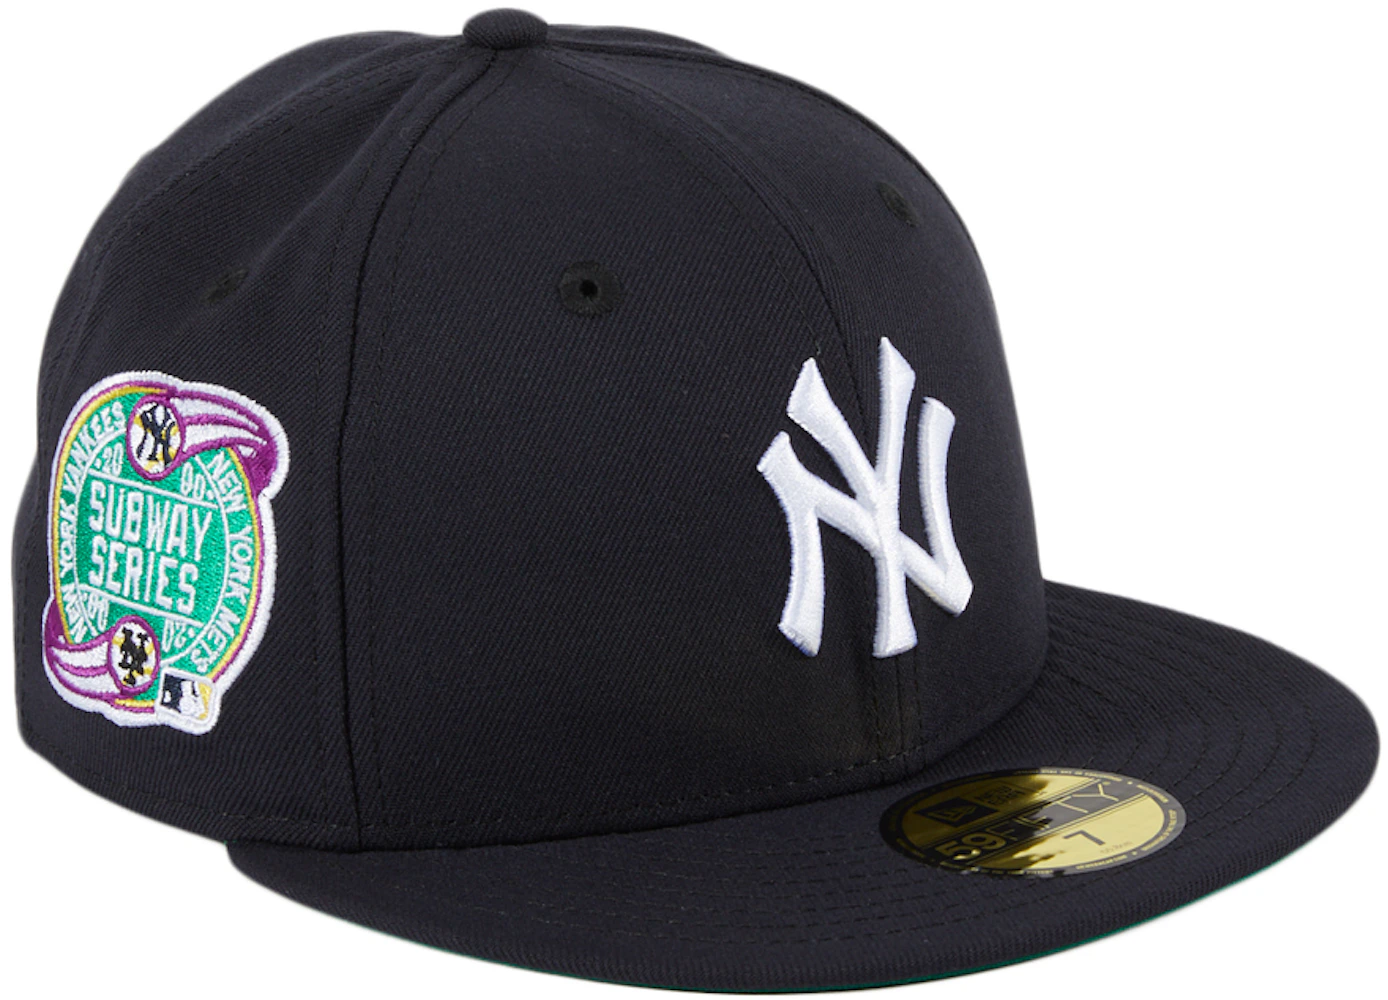 NEW ERA - Accessories - New York Yankees 27 Champs Fitted - NVY/WHT